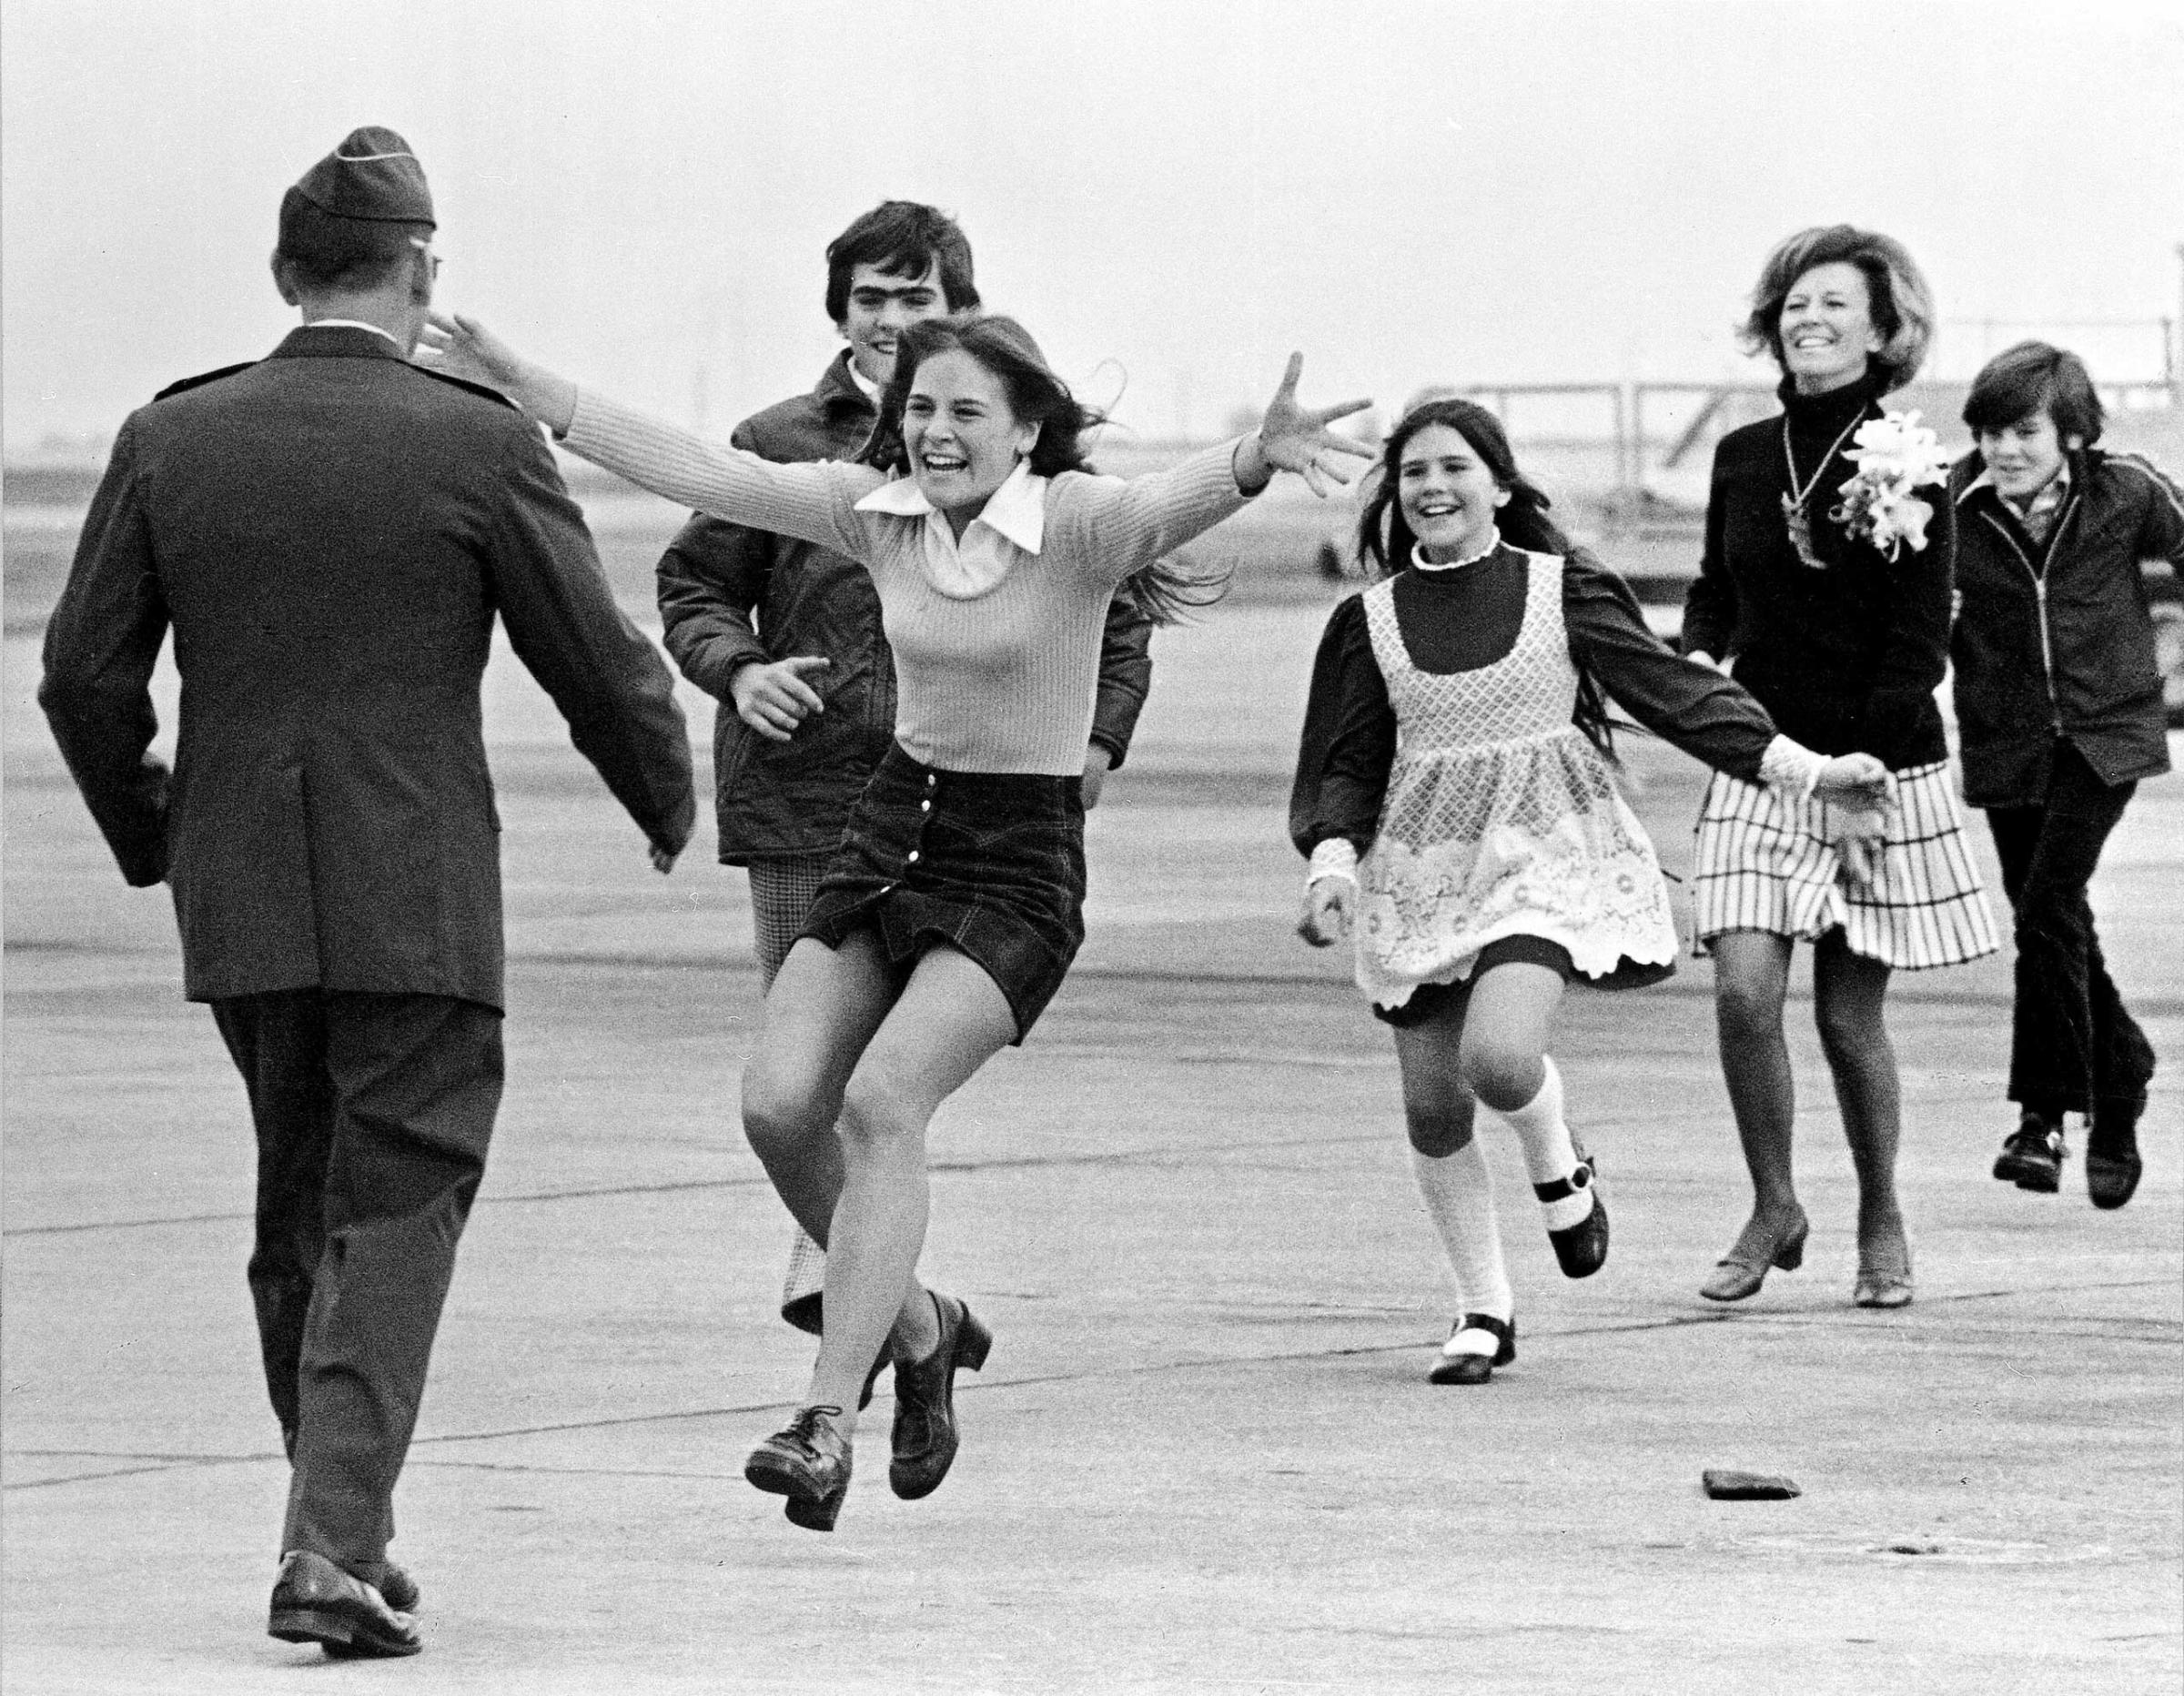 Released prisoner of war Lt. Col. Robert L. Stirm is greeted by his family at Travis Air Force Base in Fairfield, Calif., as he returns home from the Vietnam War on March 17, 1973.